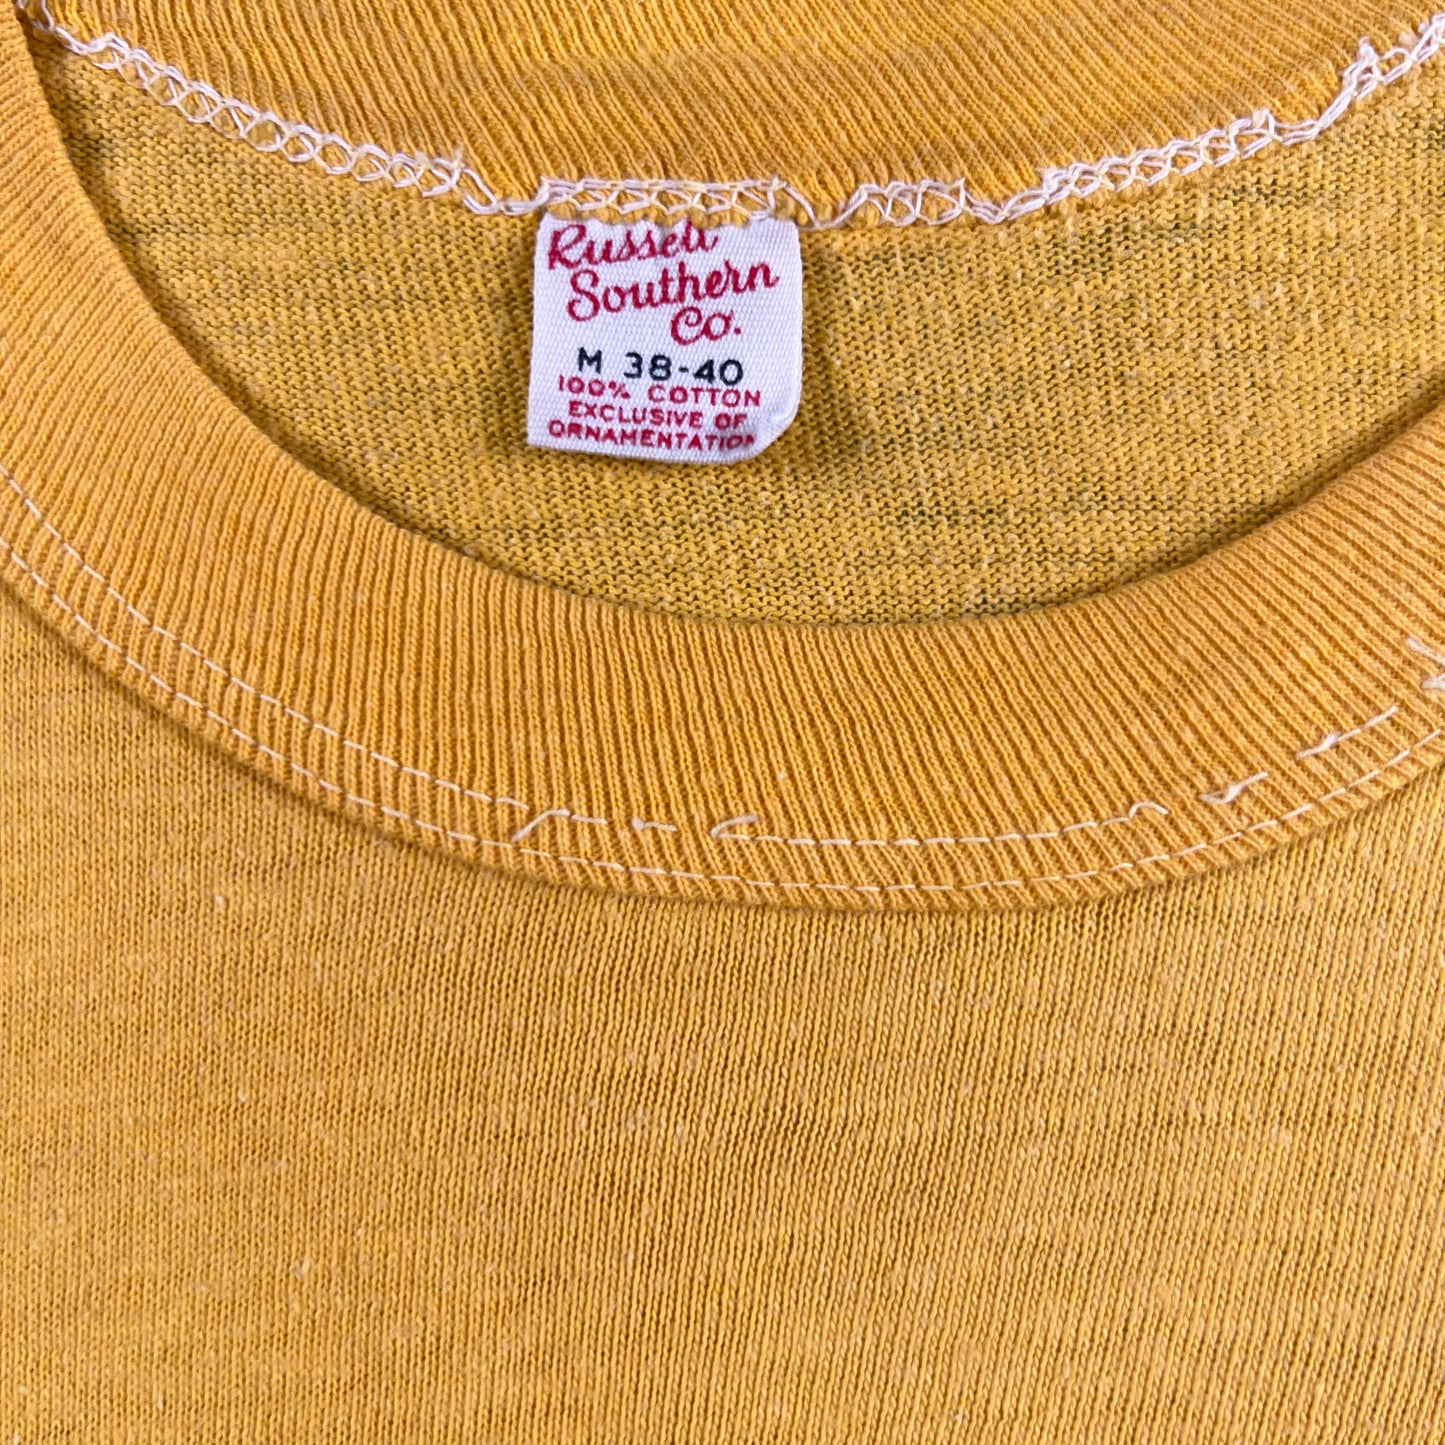 60s Physical Education Tee- S